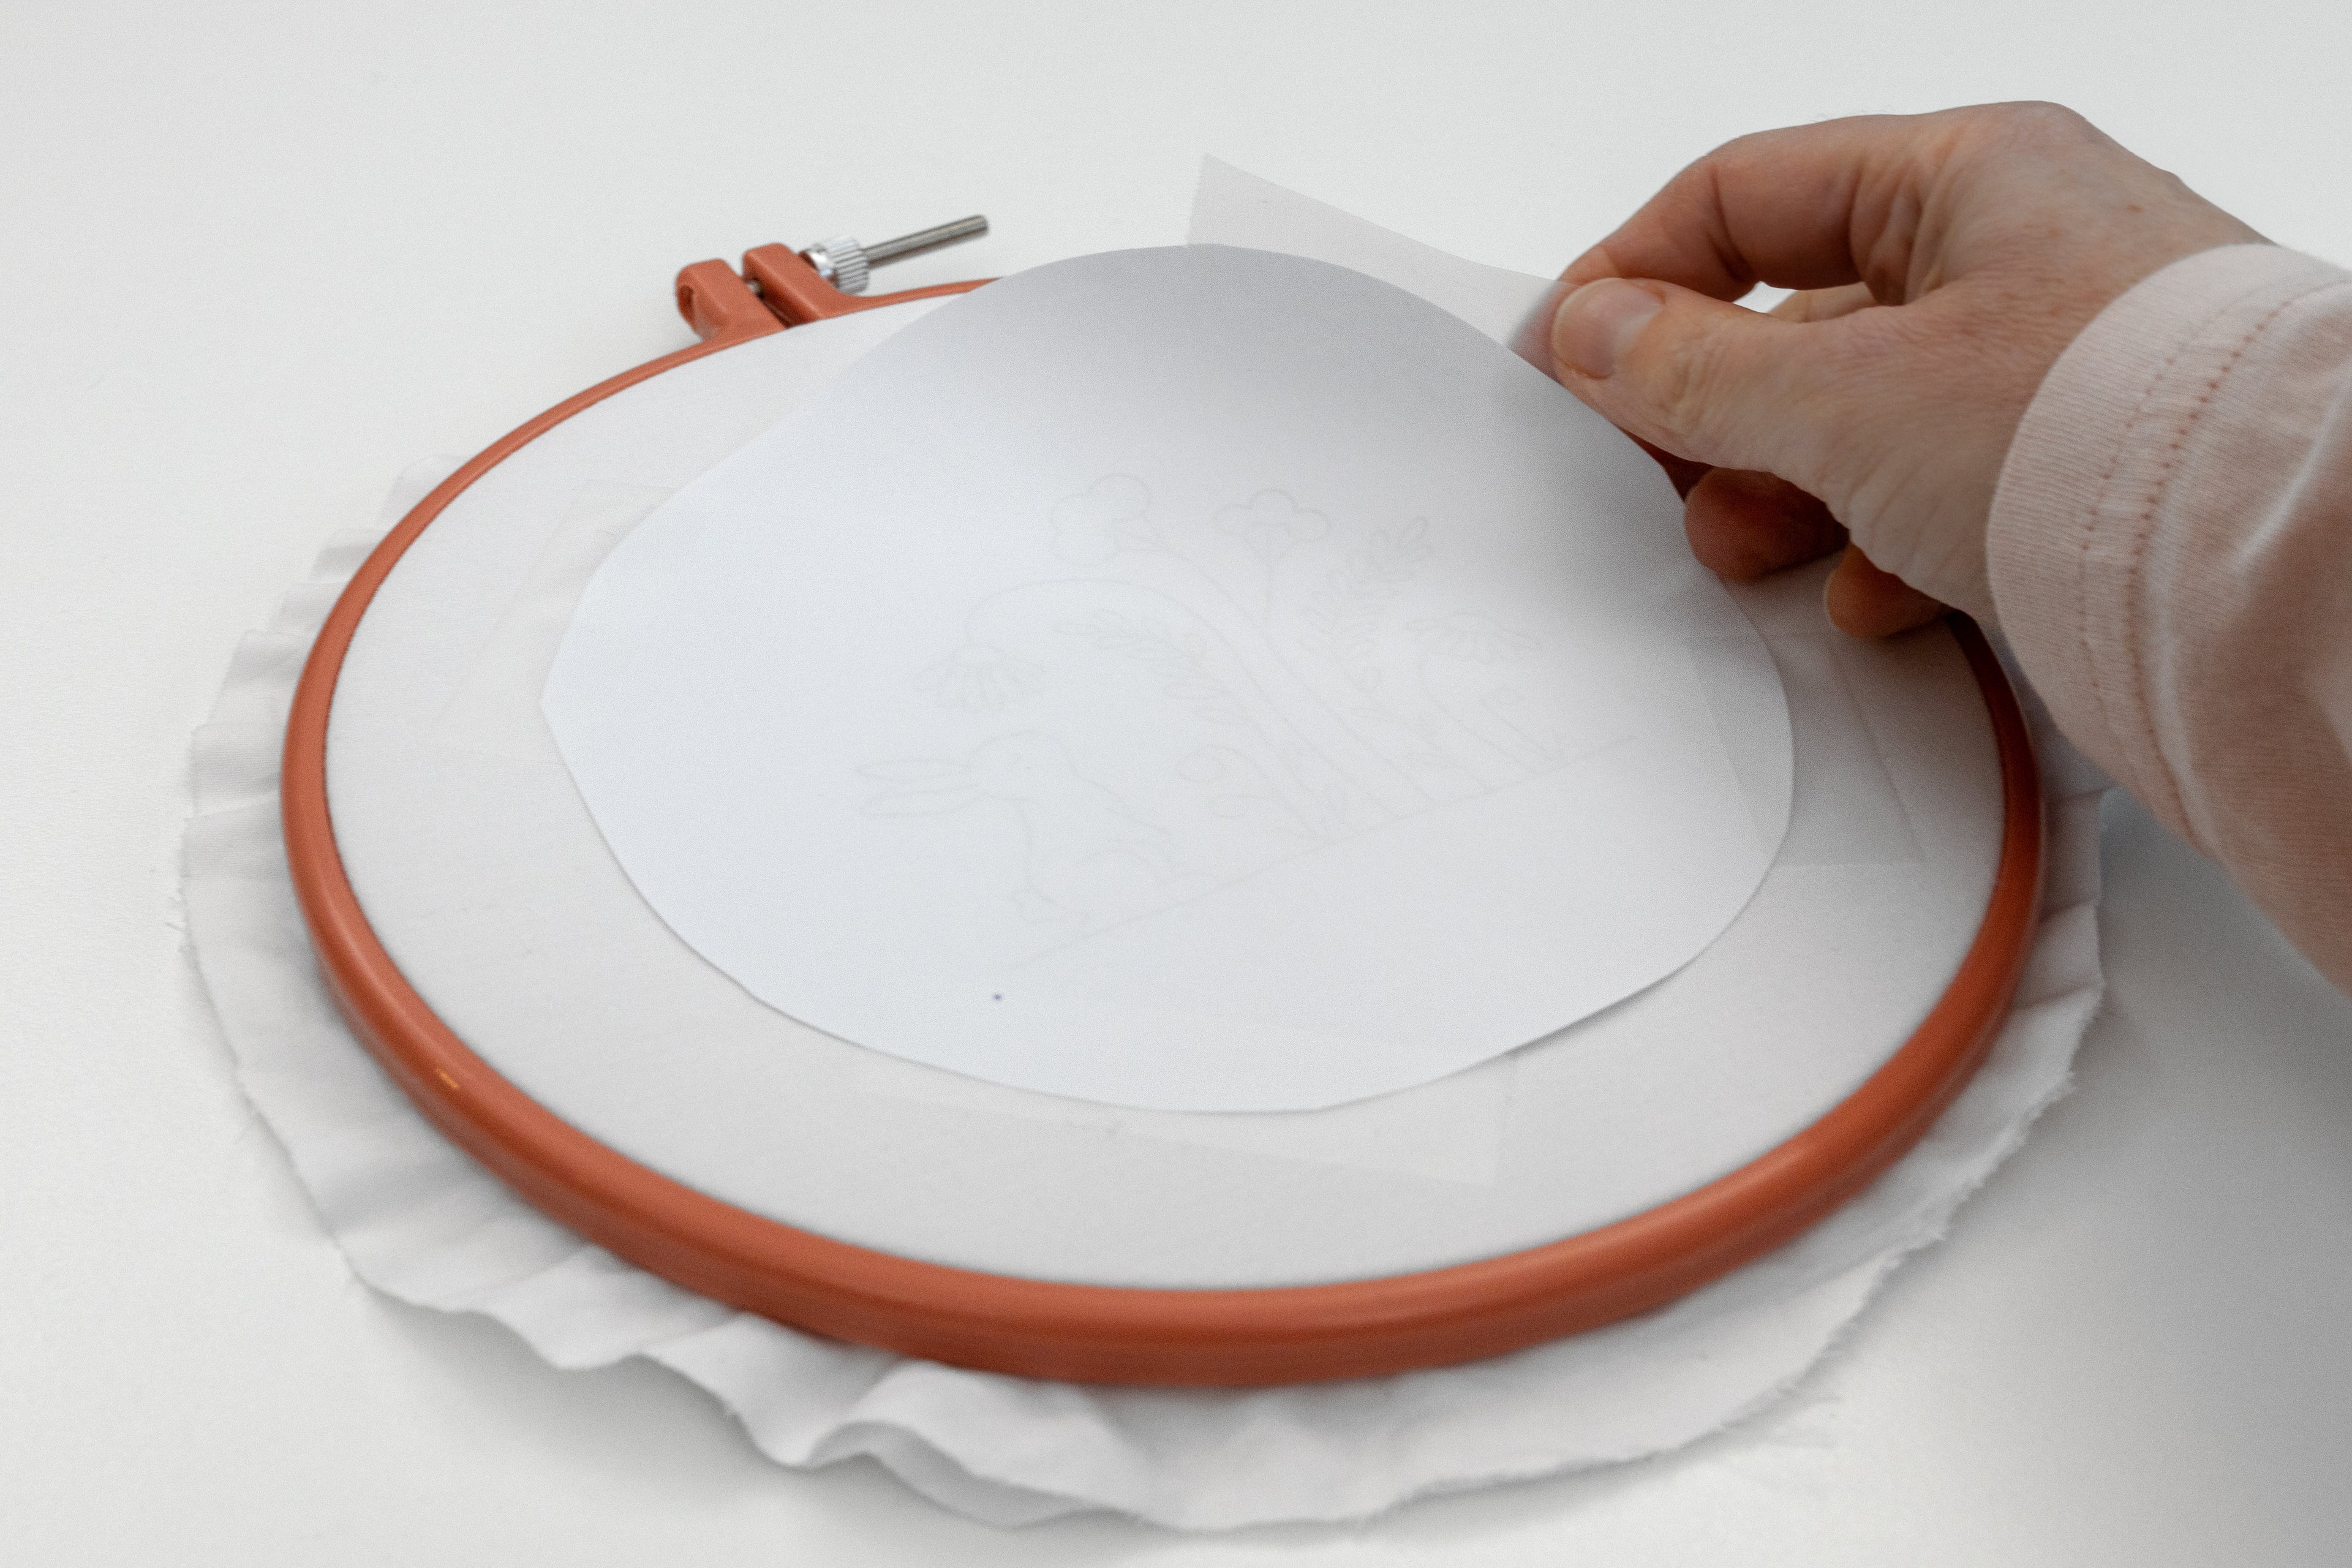 A hand cellotapes the pattern onto the blank hoop.